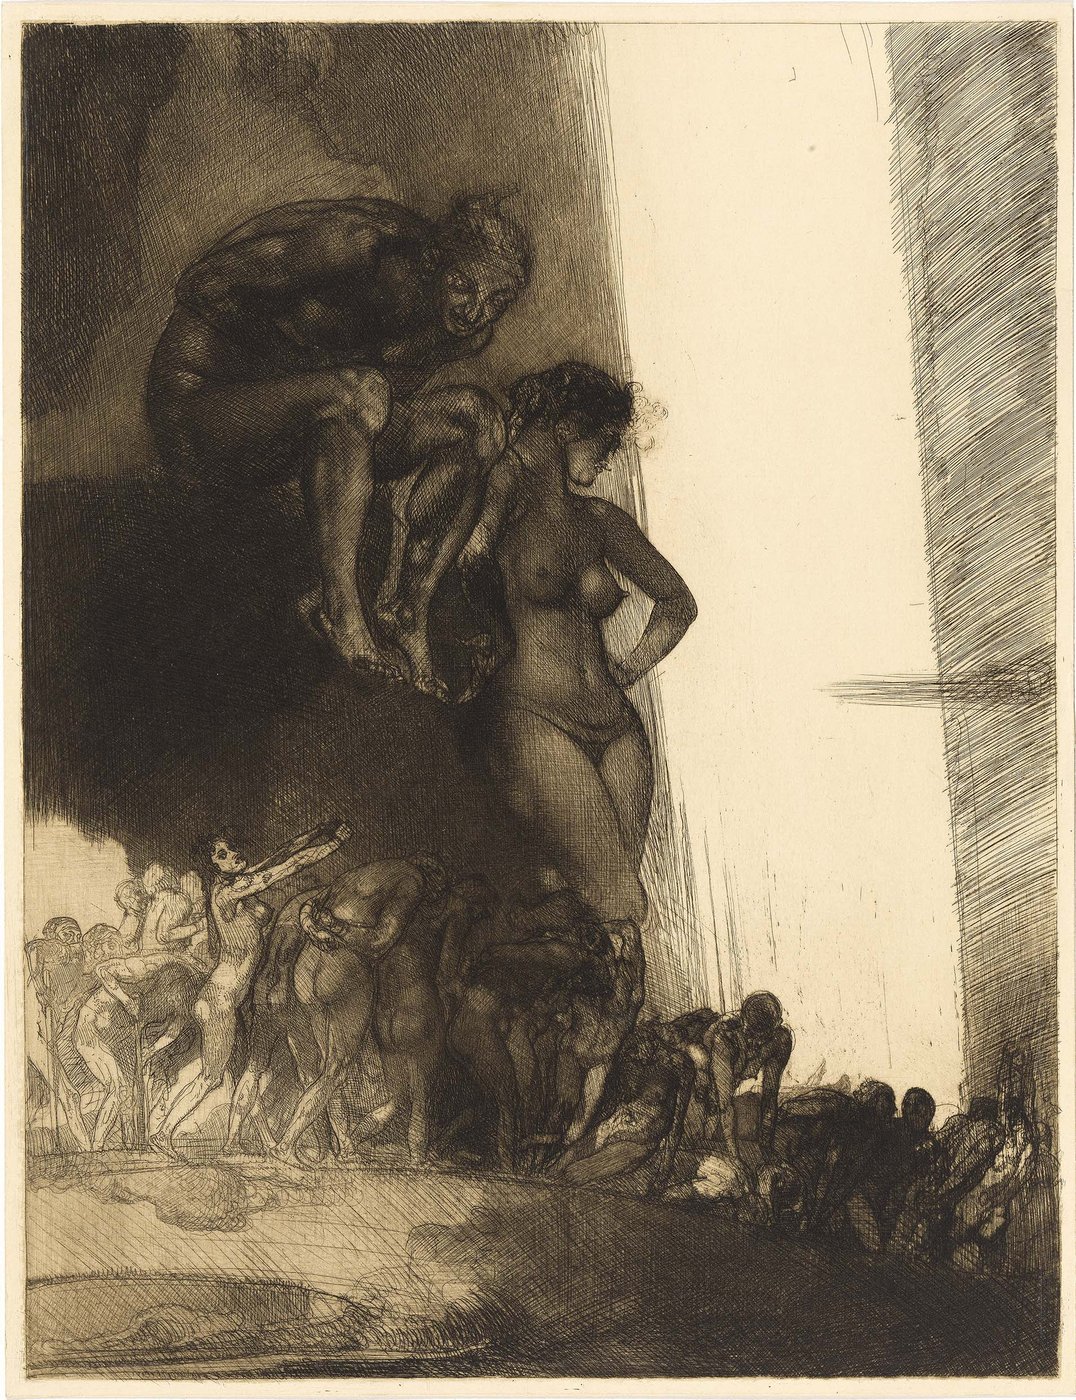 In the left, dark half of the picture, the etching shows death and sin as huge, naked human figures. In front of them, from left to right, small, likewise naked people are moving into hell as a stream of sinners.